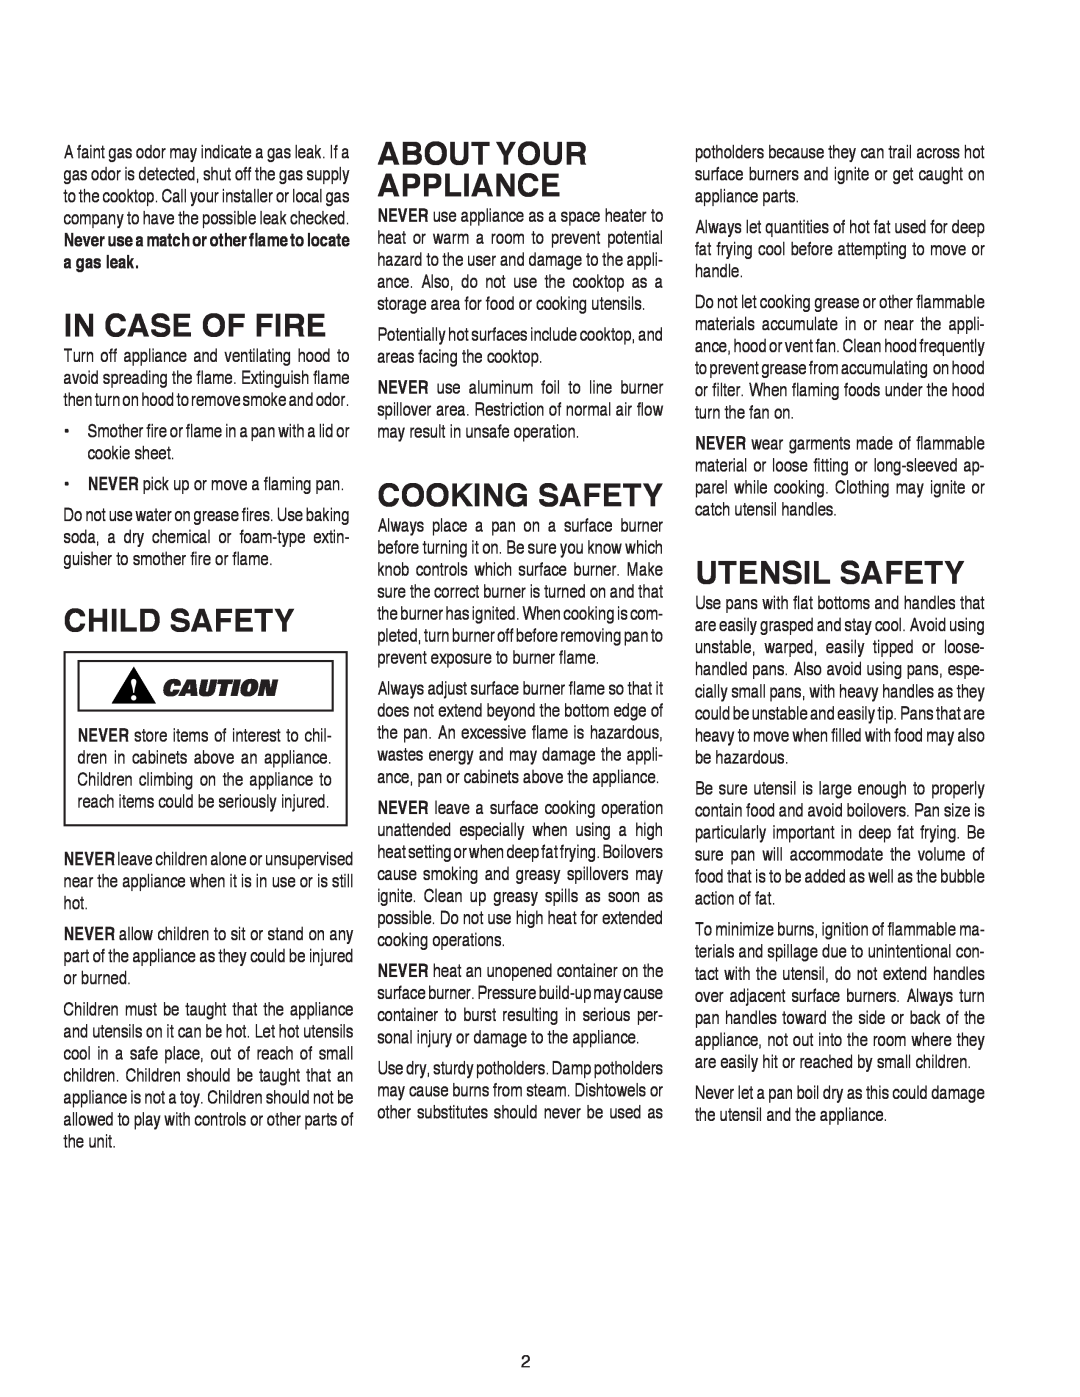 Maytag AKS3040 In Case Of Fire, Child Safety, About Your Appliance, Cooking Safety, Utensil Safety 